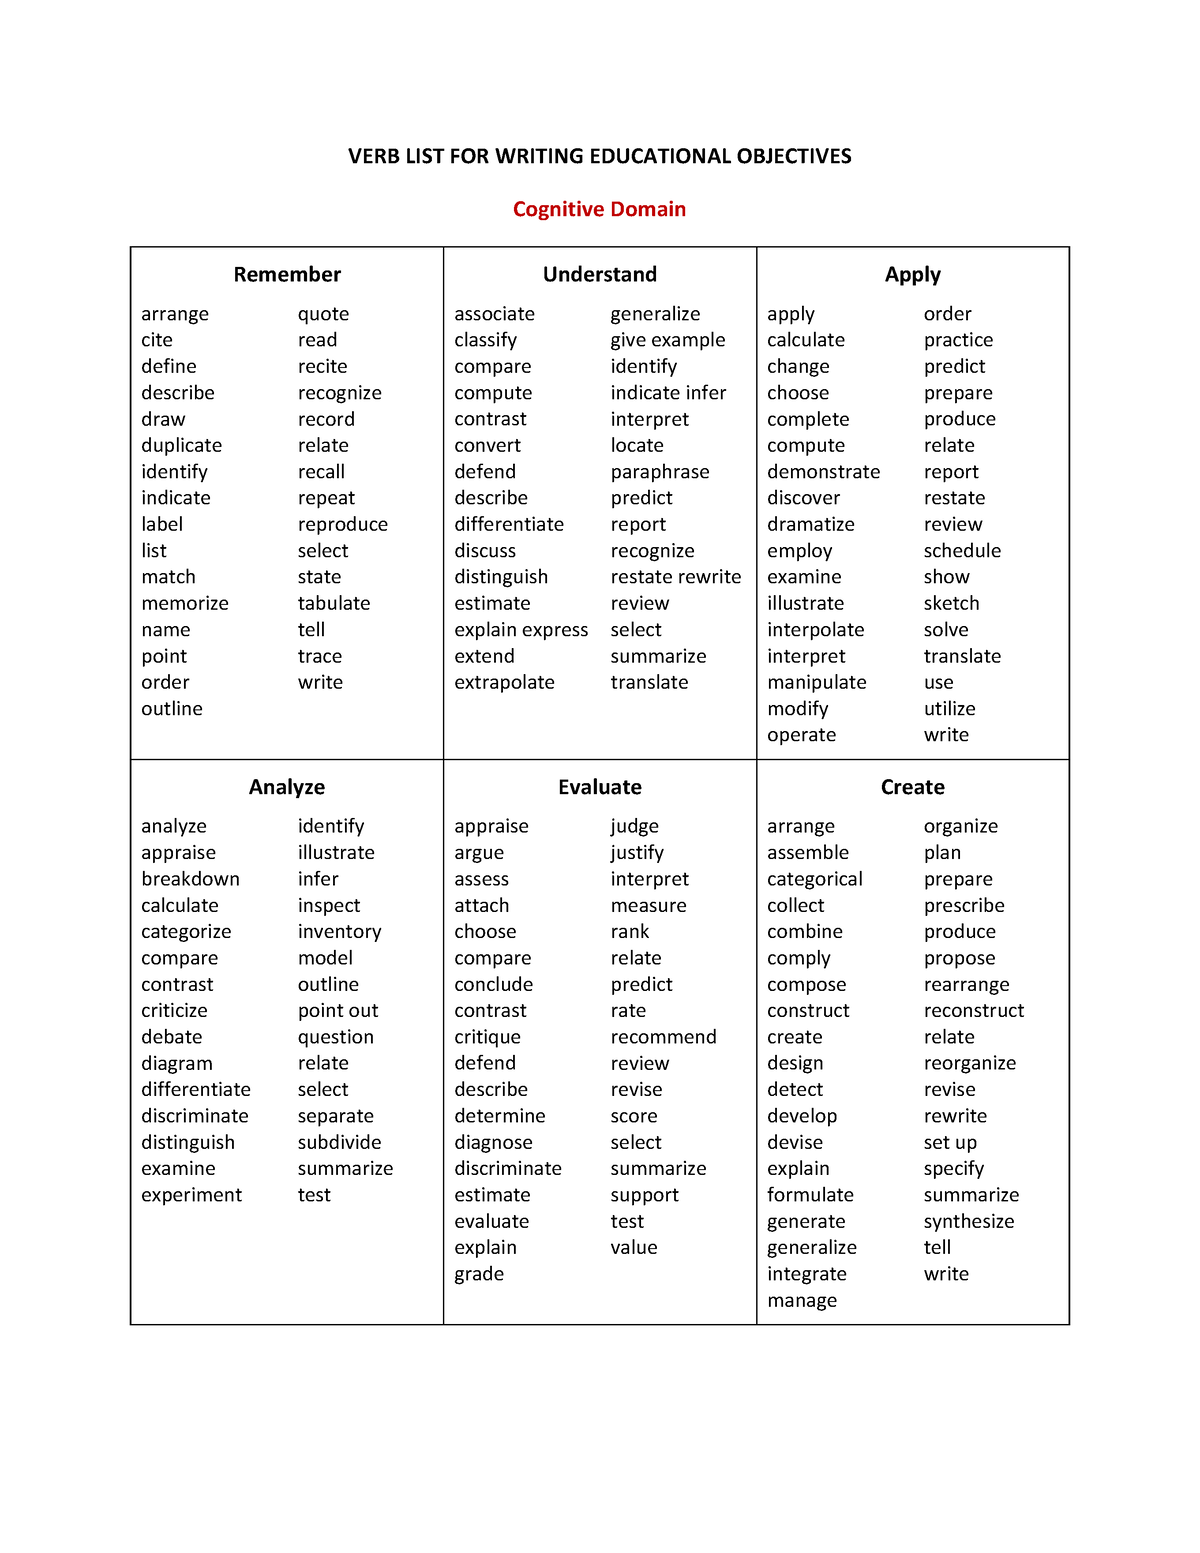 Verbs checklist for objective in lesson planning - VERB LIST FOR ...